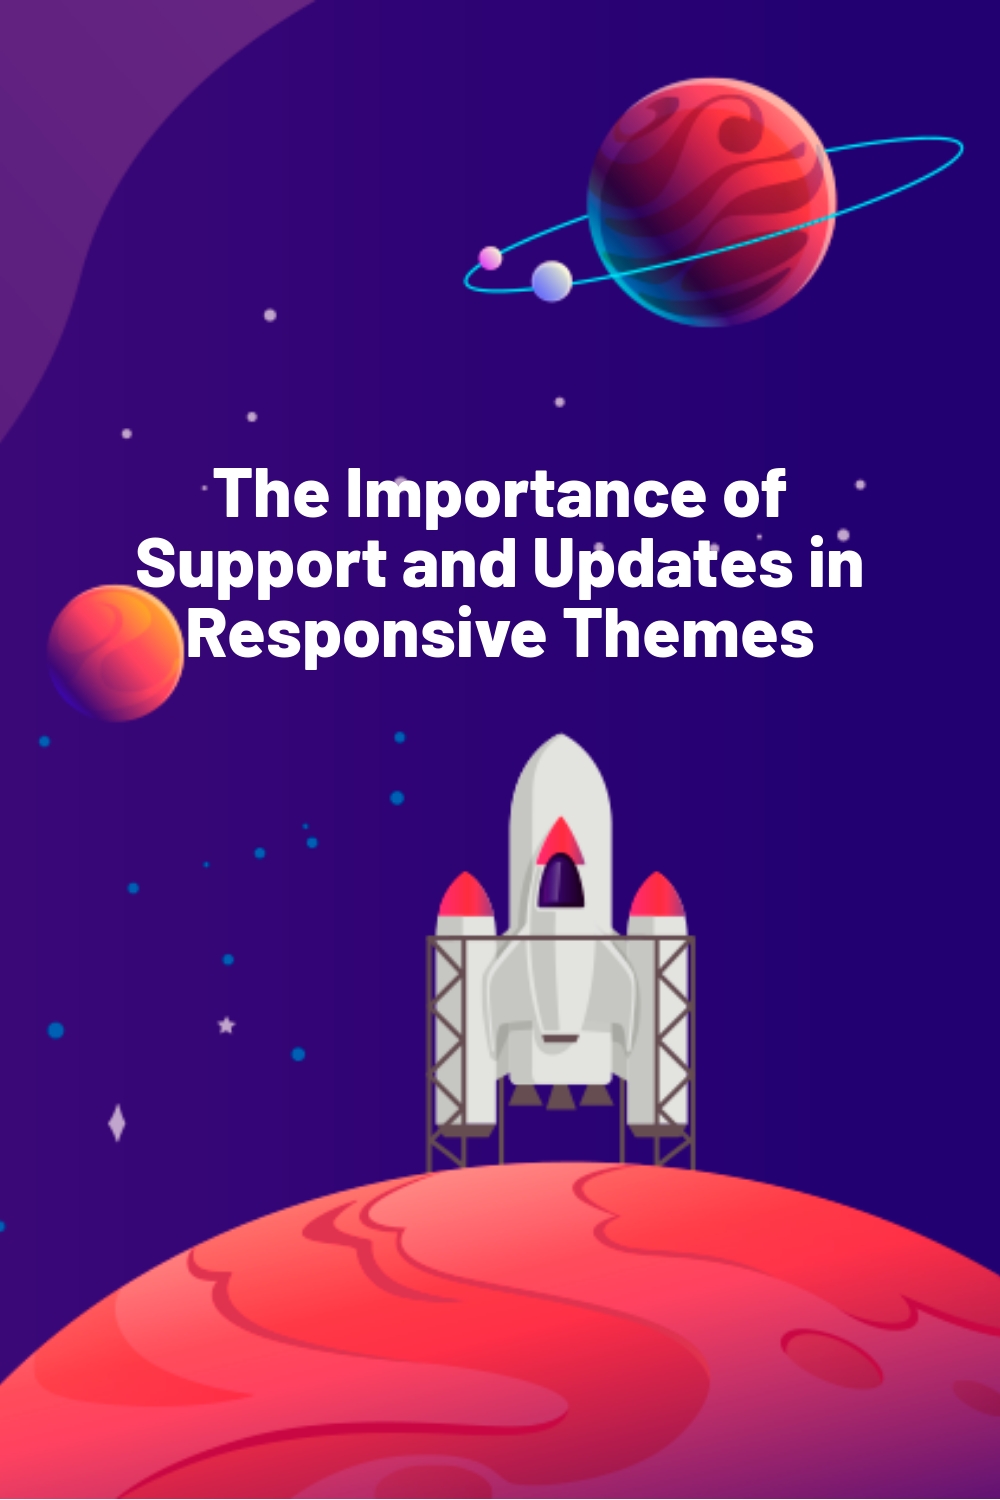 The Importance of Support and Updates in Responsive Themes